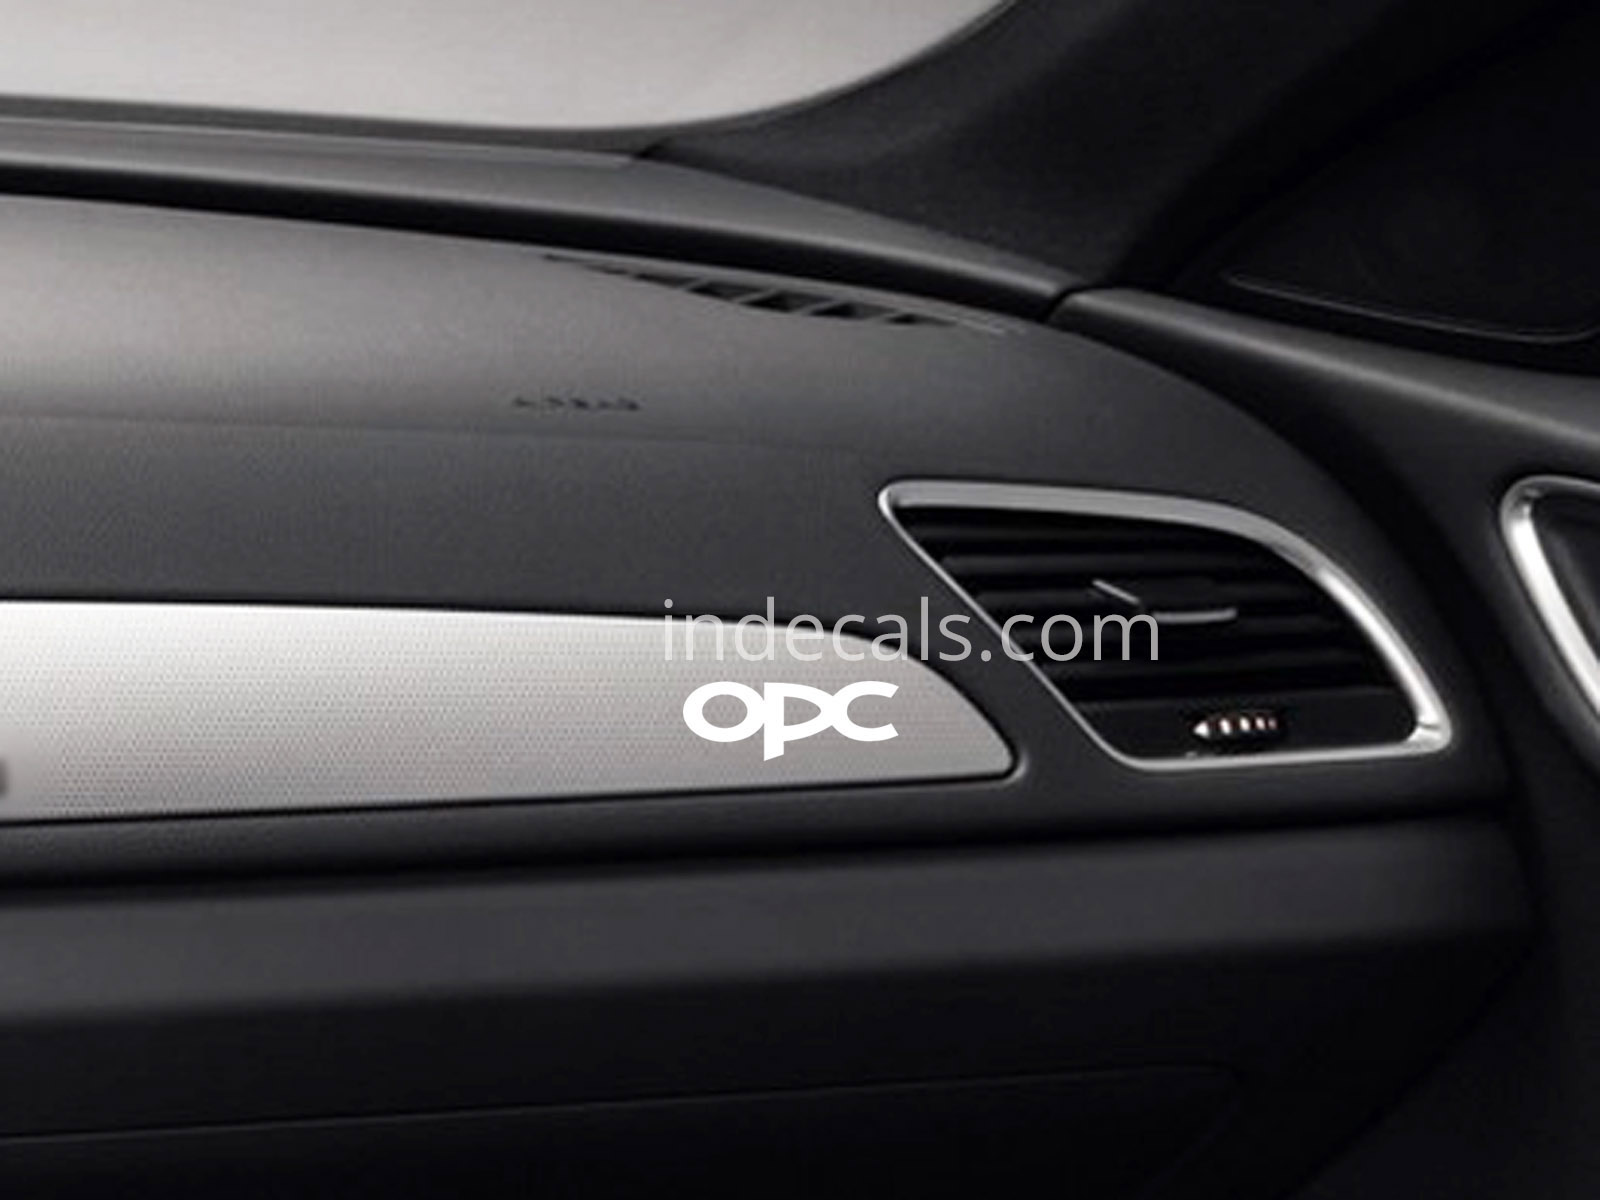 3 x Opel OPC Stickers for Dash Trim - White 